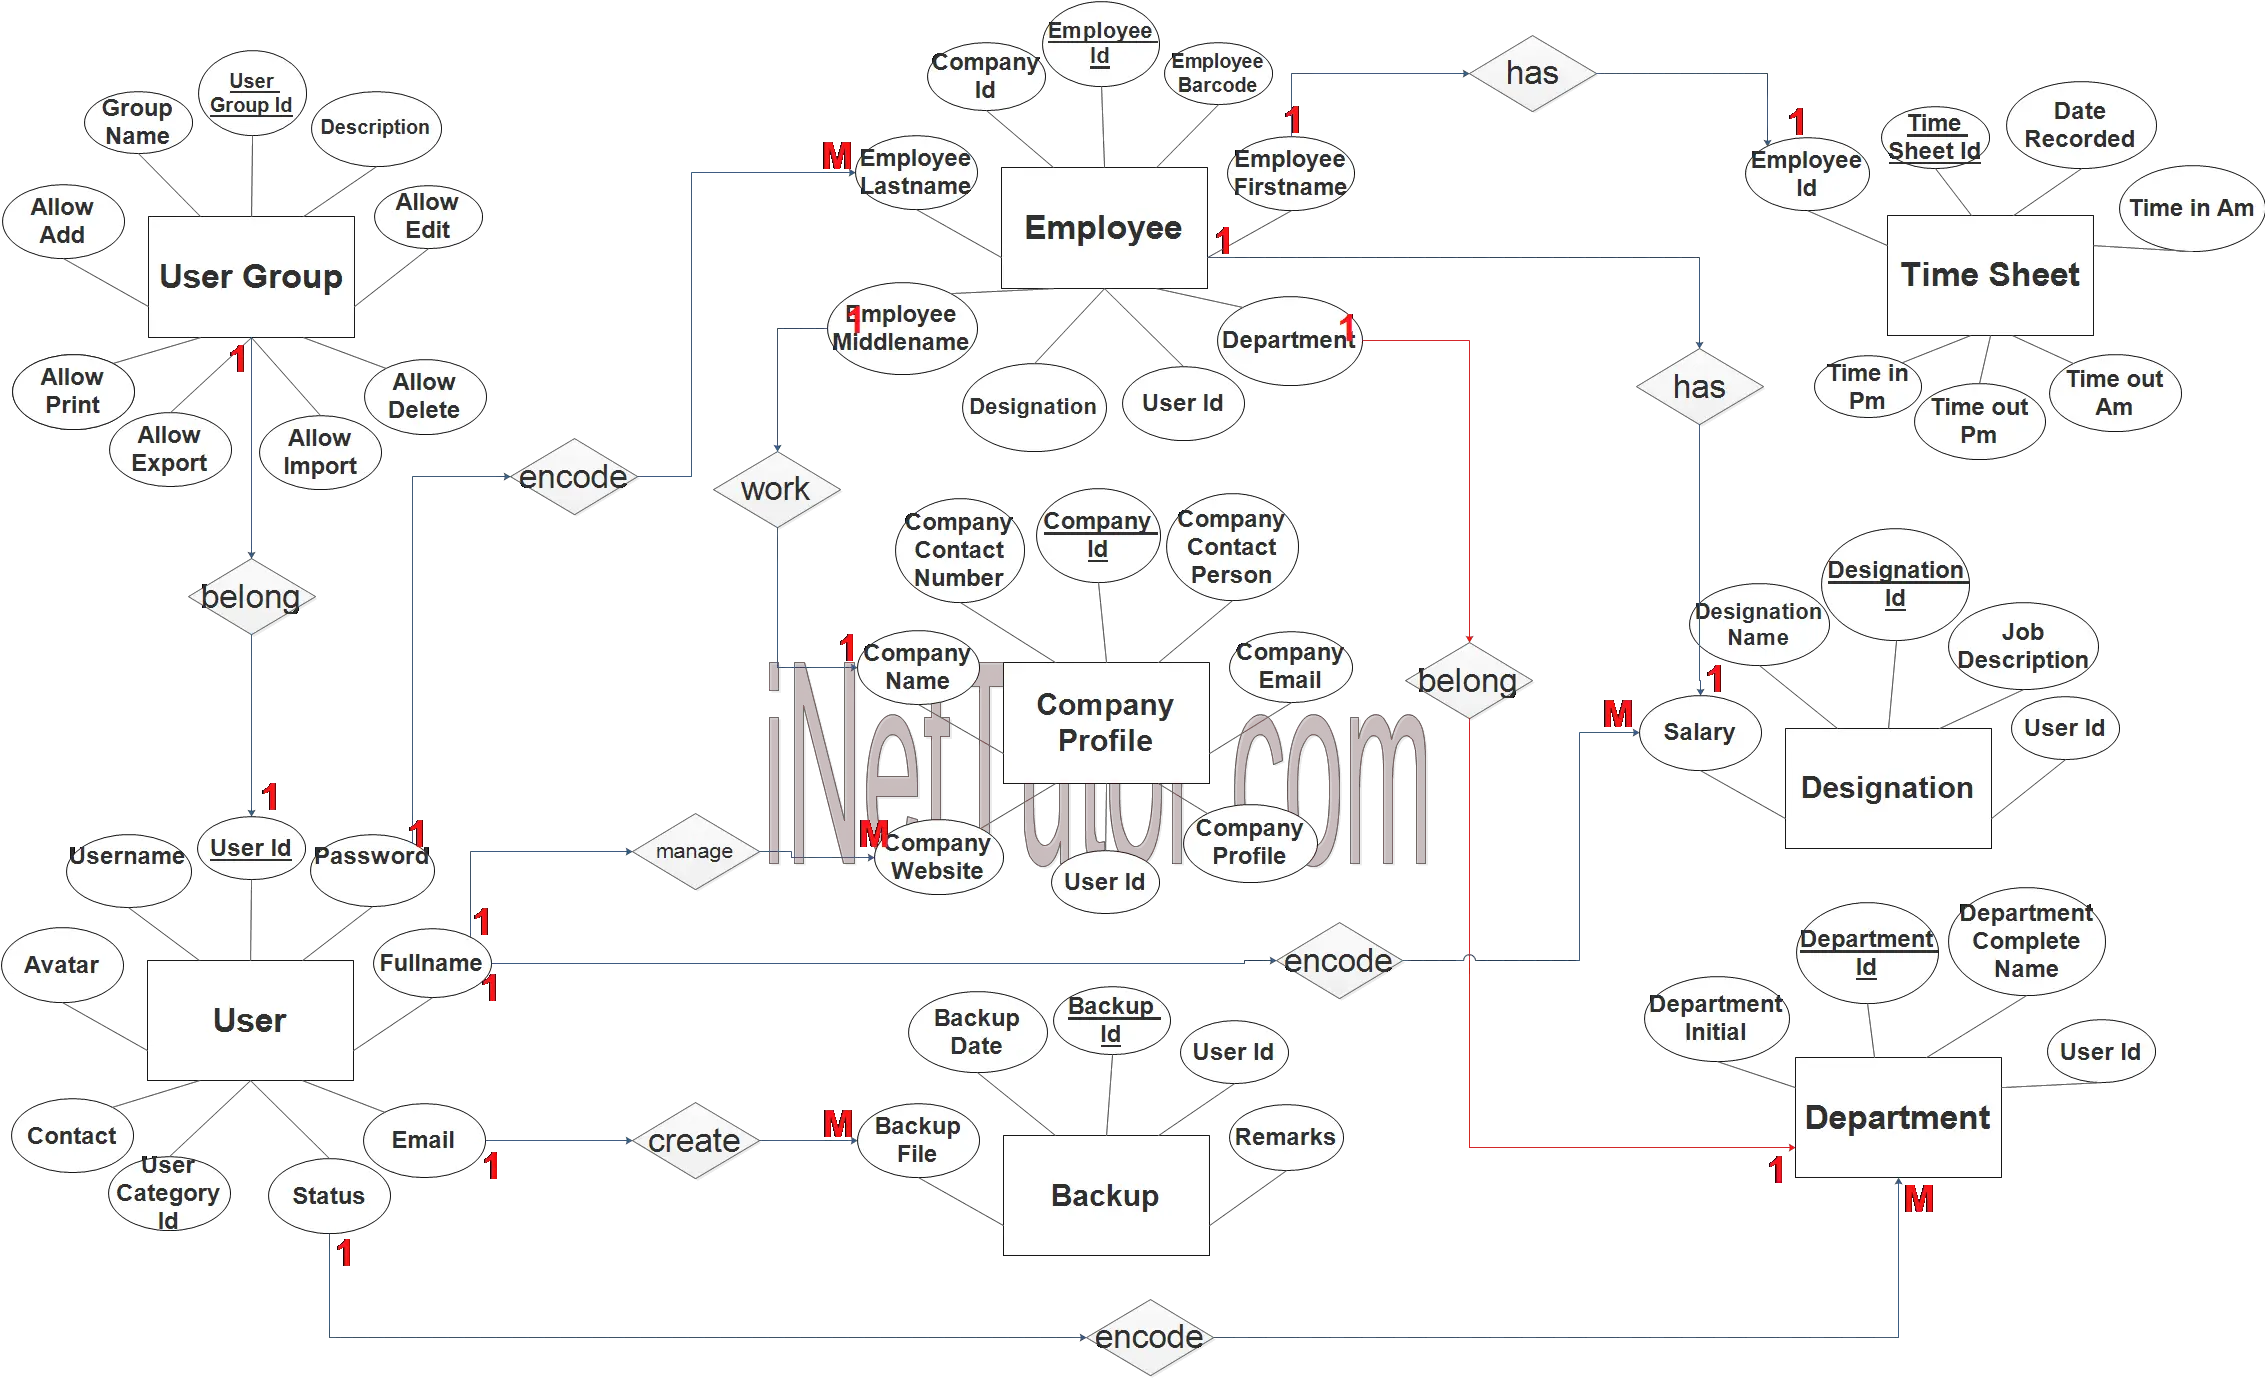 Daily Time Record System ER Diagram - Step 3 Complete ERD